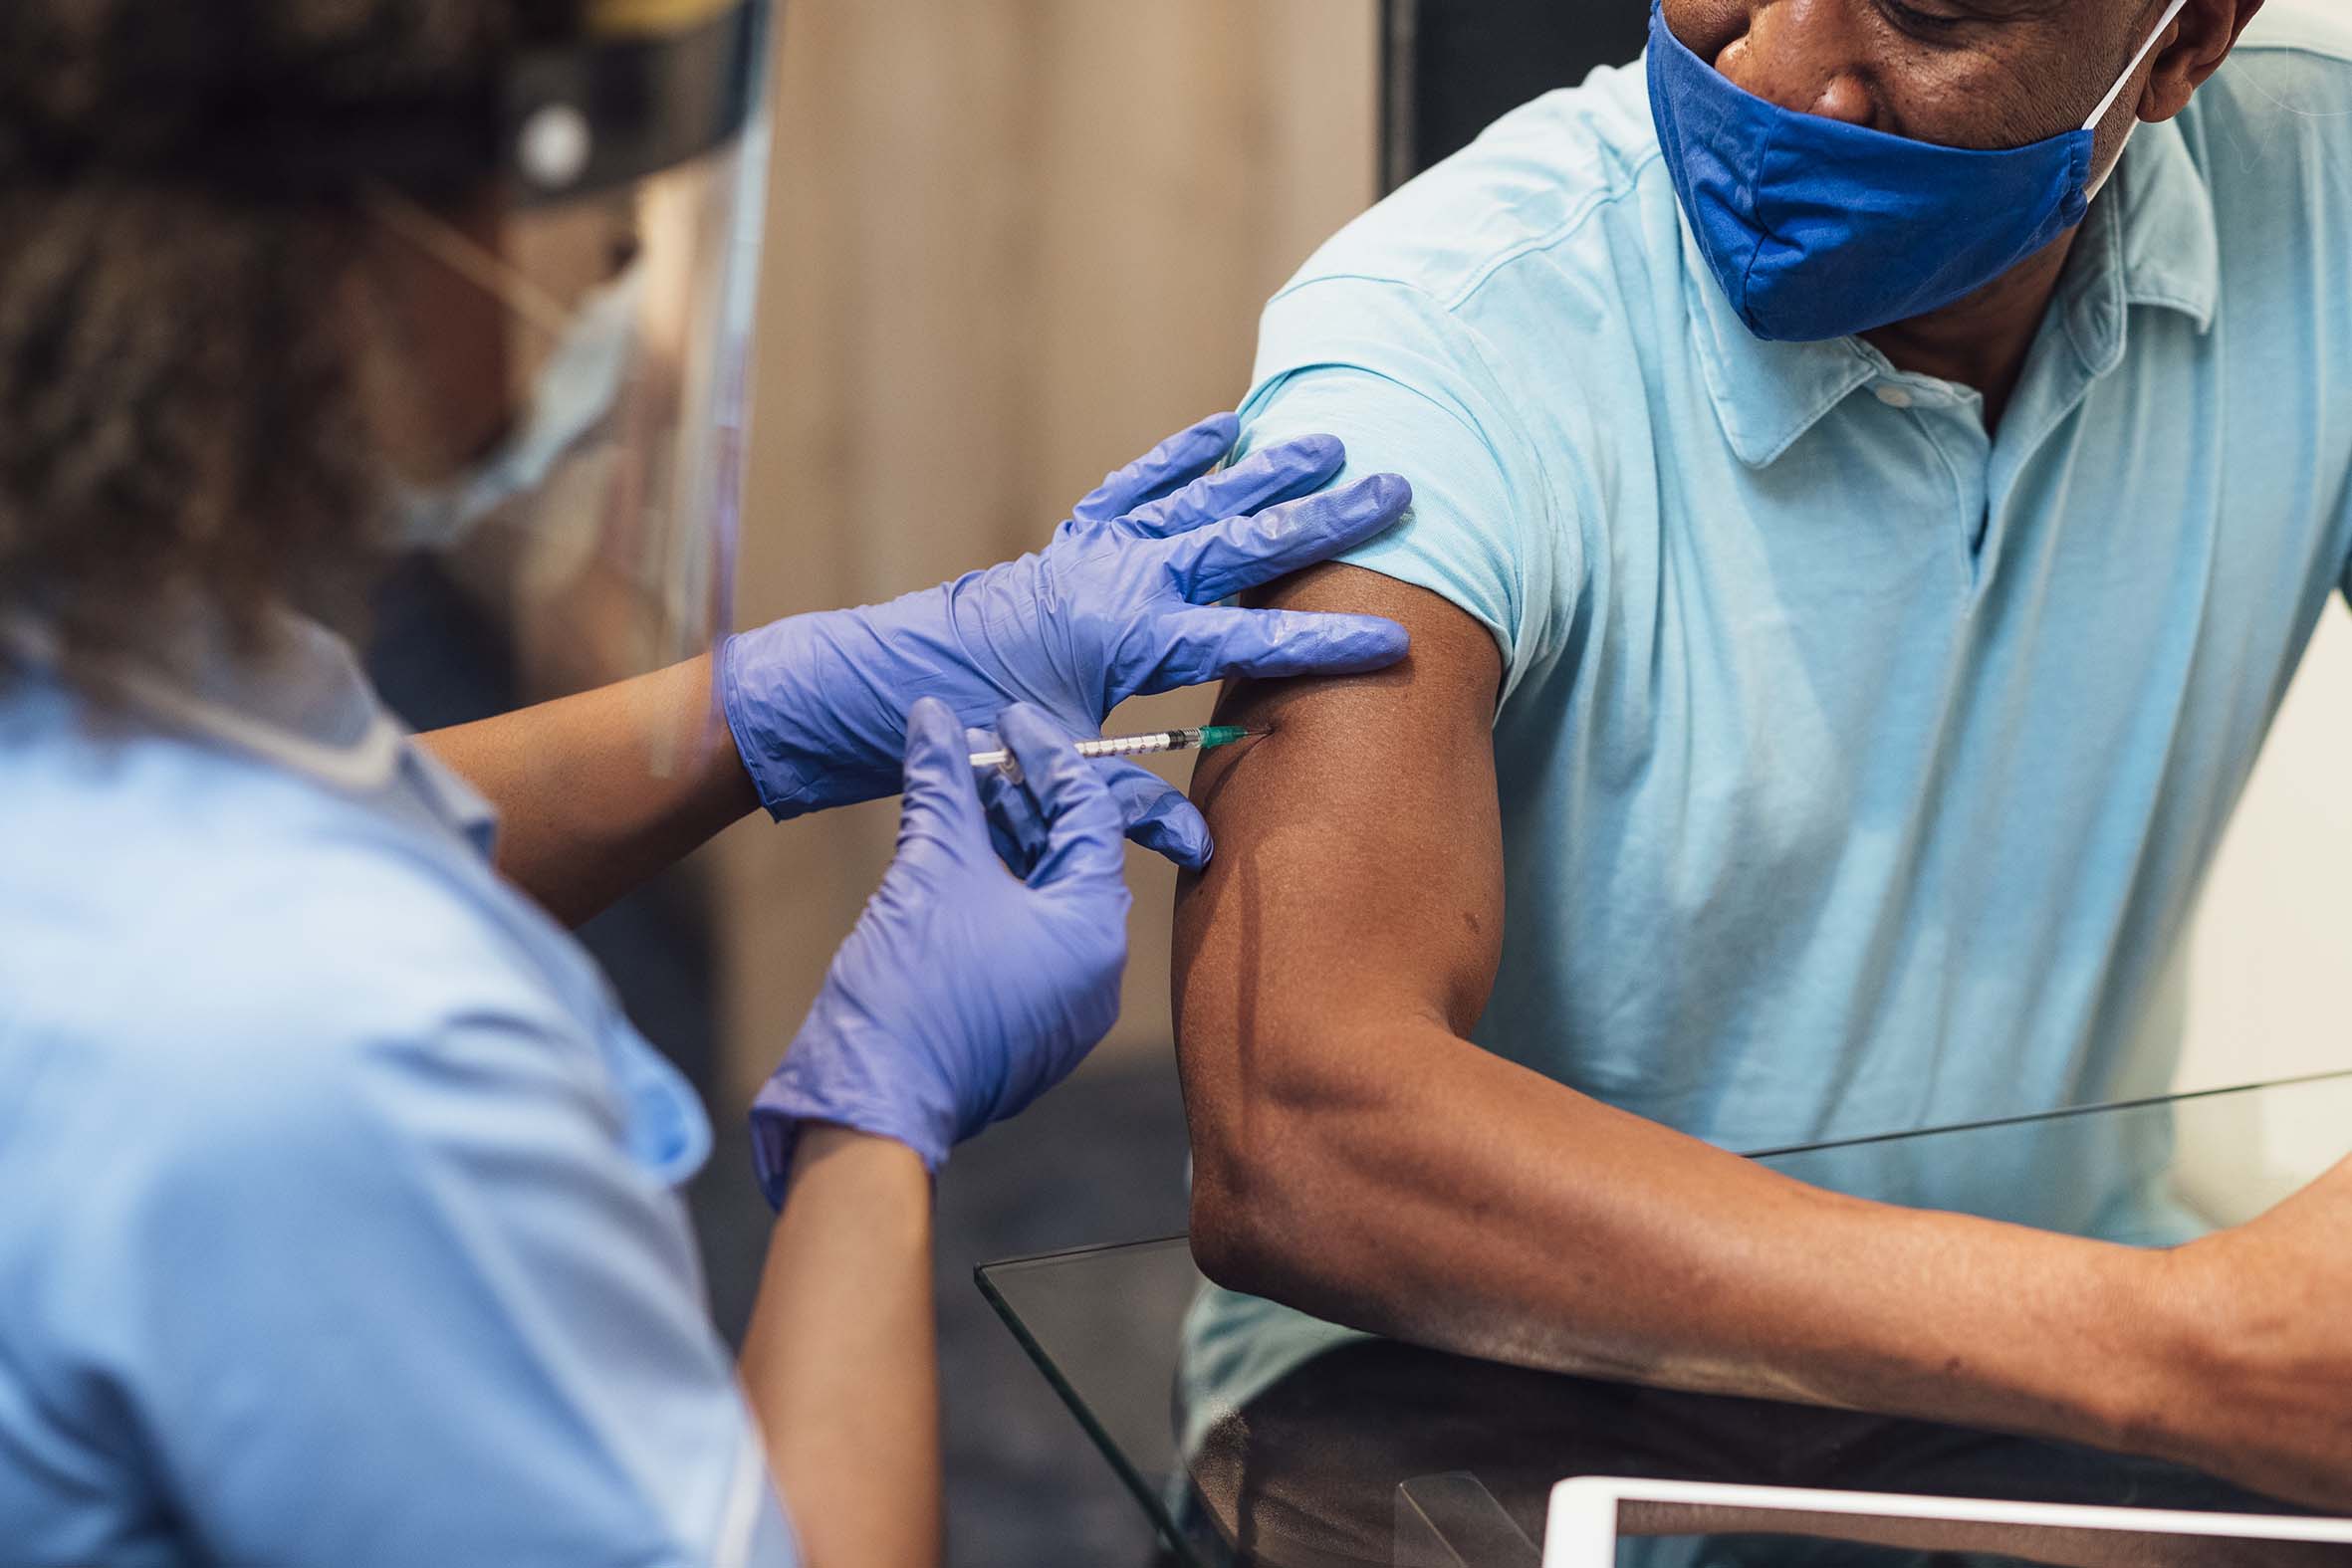 Someone vaccinating a patient wearing a blue tshirt.